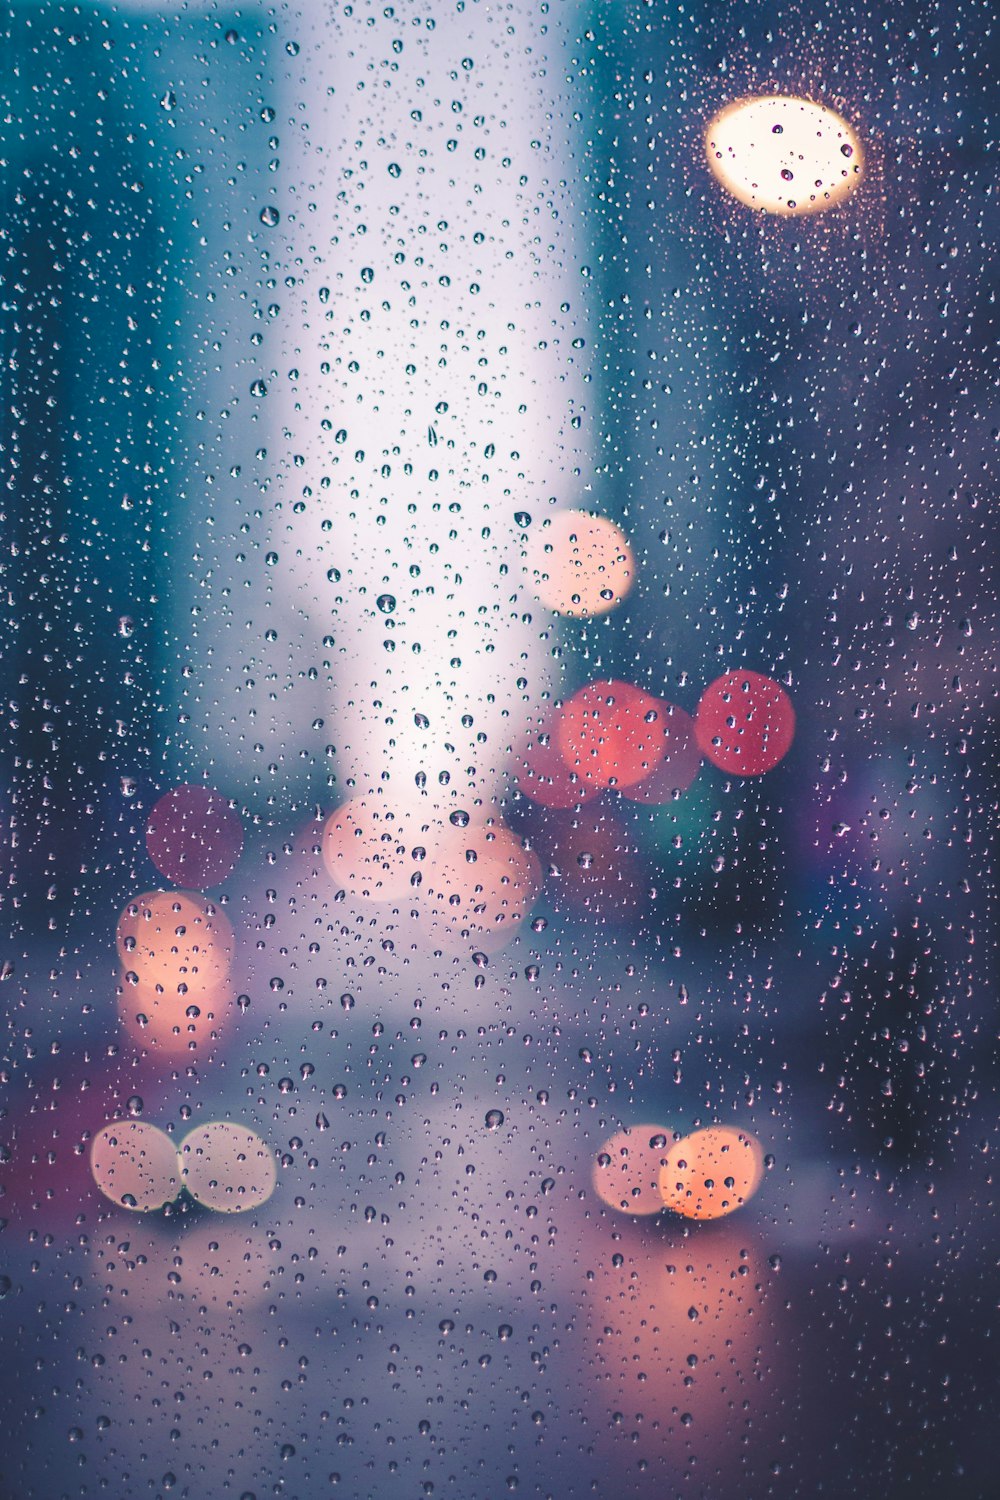 Rainy Day Photos, Download The BEST Free Rainy Day Stock Photos & HD Images